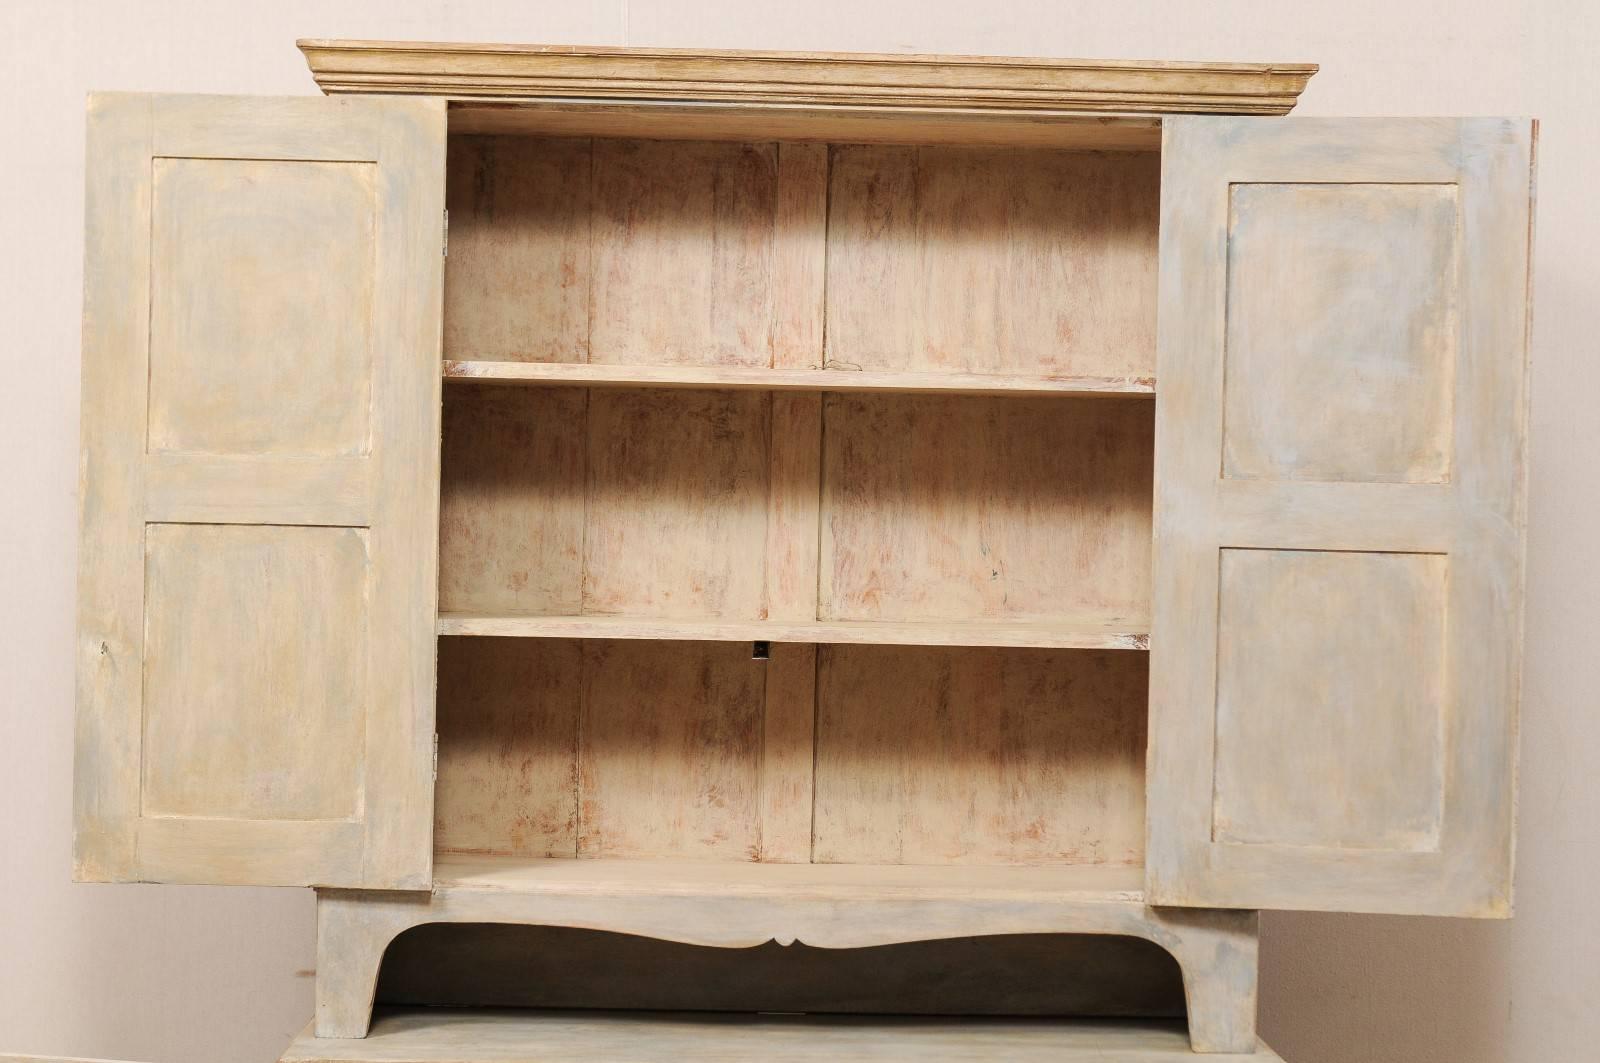 Swedish Mid-19th Century Painted Wood Cabinet with Ample Shelves and Storage For Sale 2